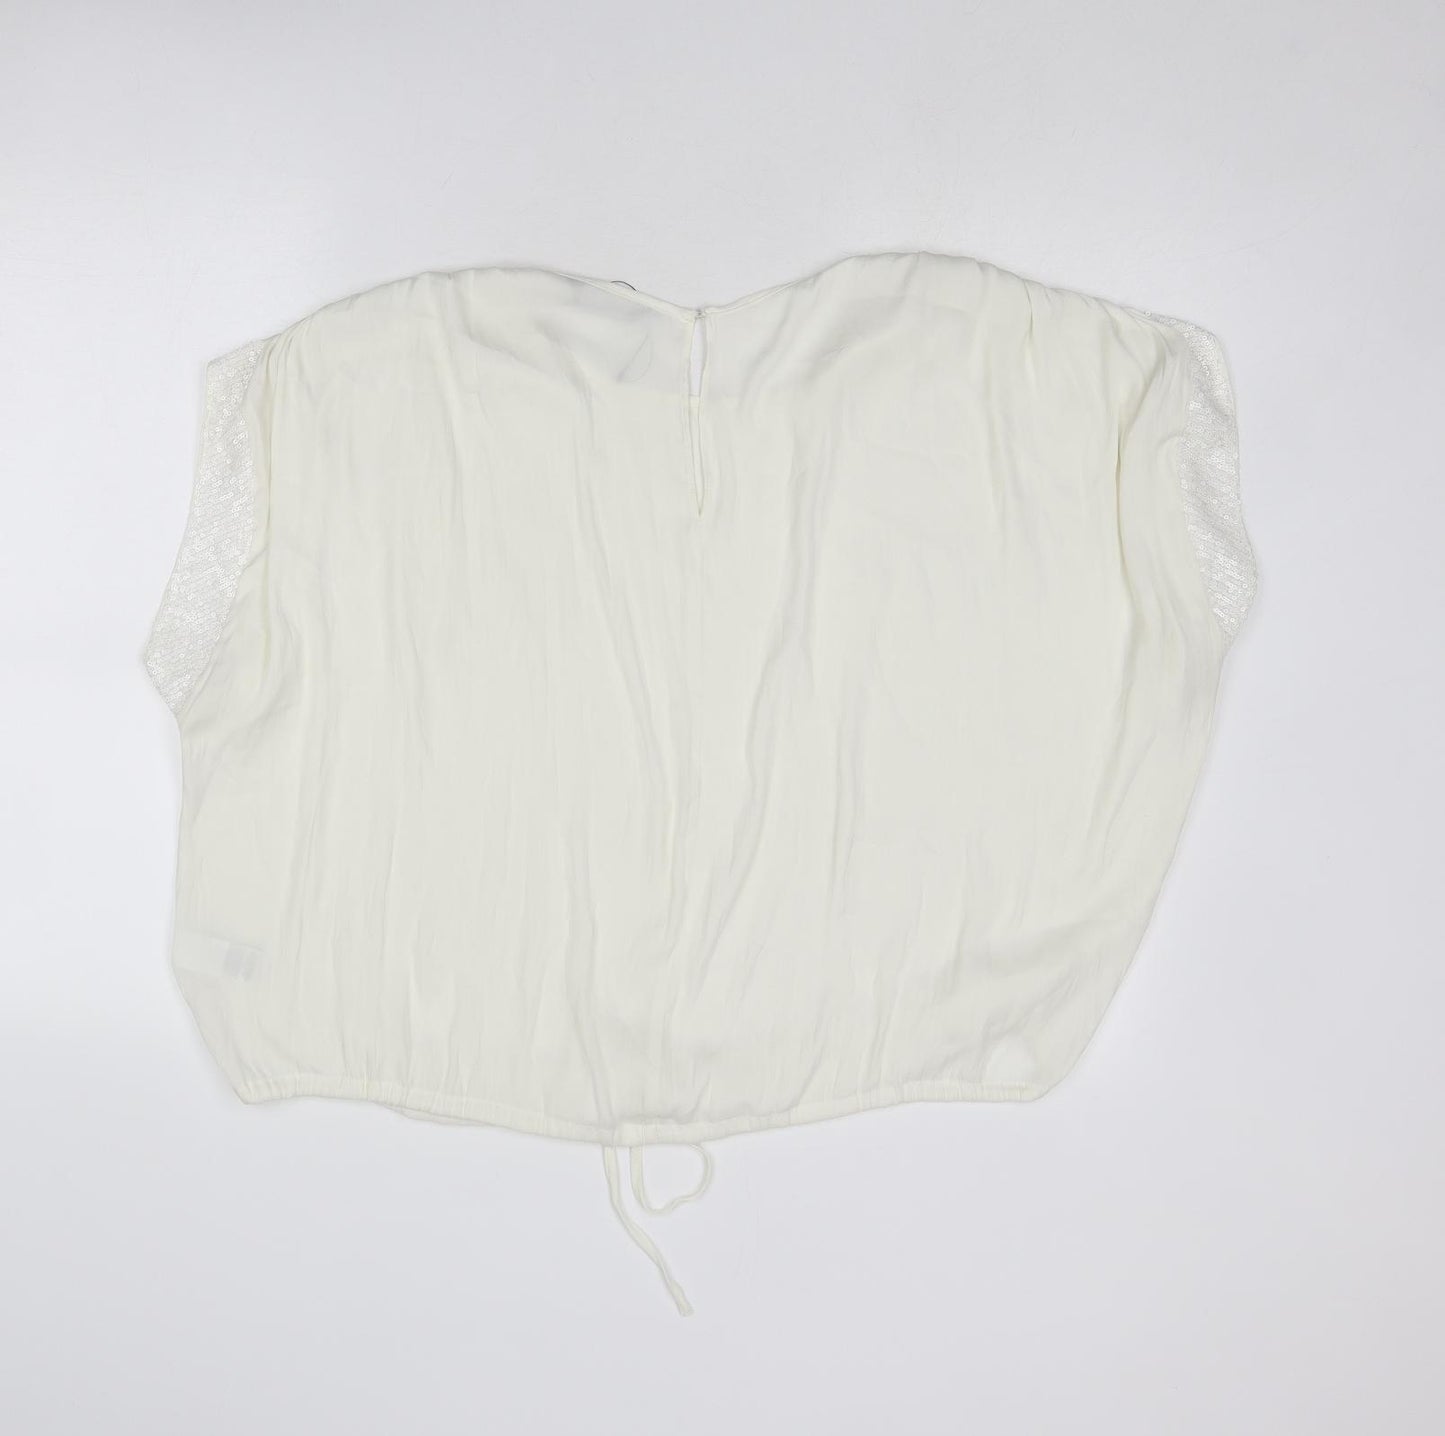 Marks and Spencer Womens Ivory Polyester Basic Blouse Size 22 Boat Neck - Tie Front Detail